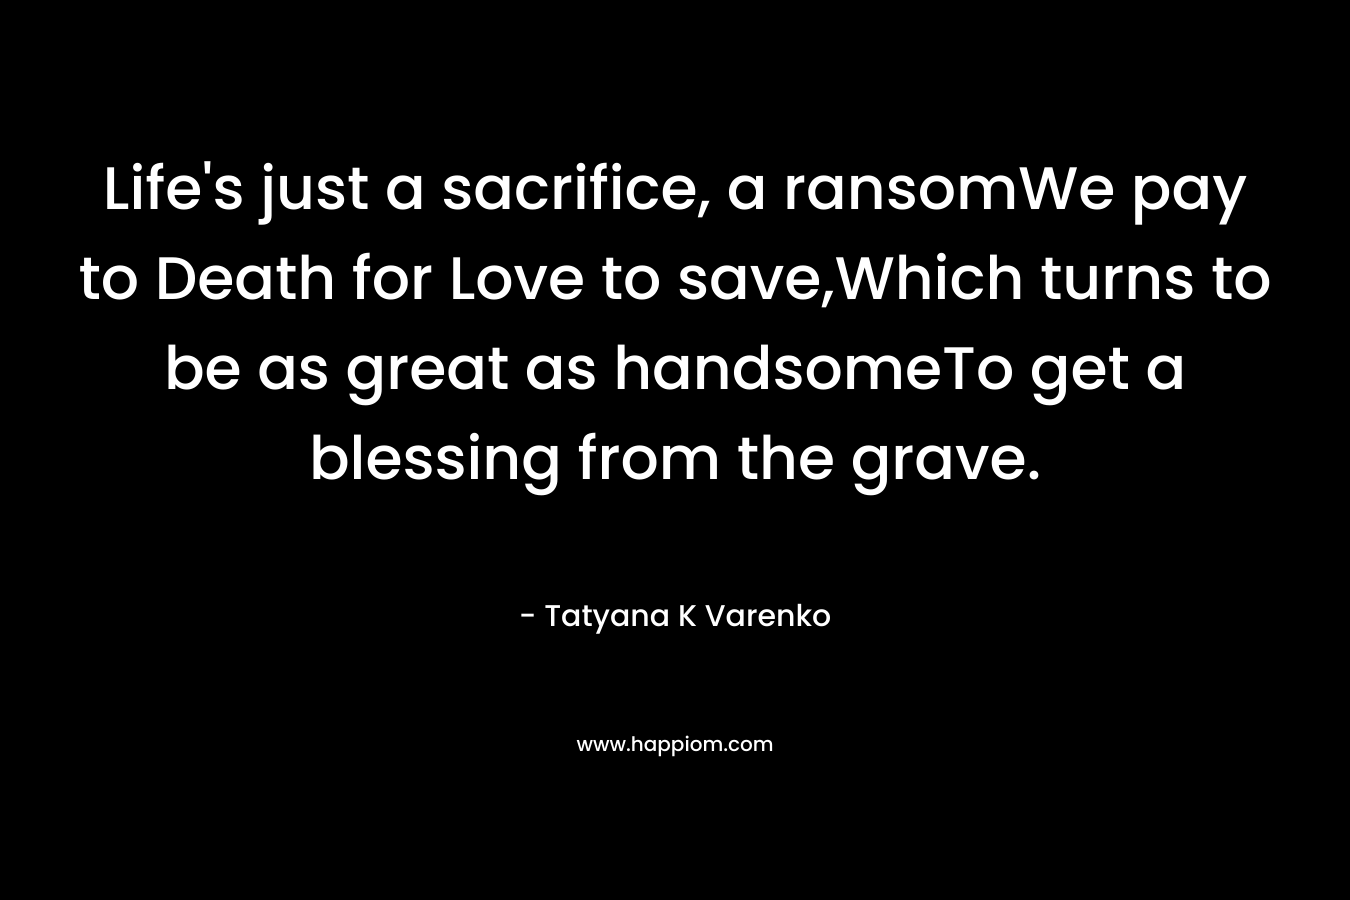 Life's just a sacrifice, a ransomWe pay to Death for Love to save,Which turns to be as great as handsomeTo get a blessing from the grave.